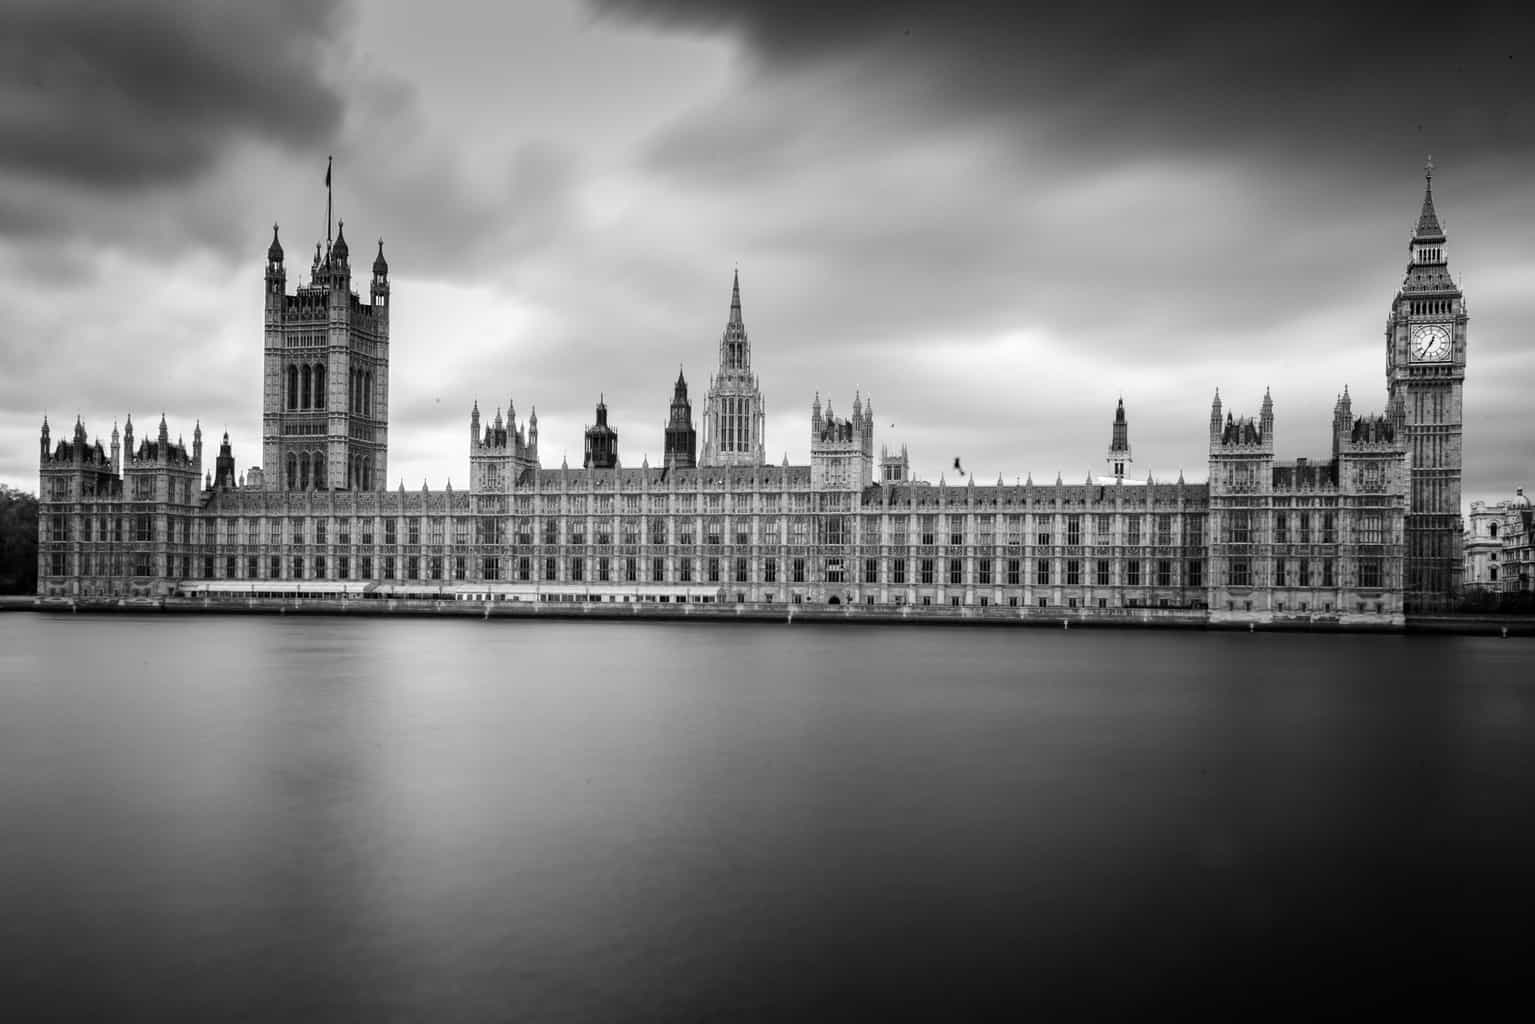  Palace of Westminster, London 